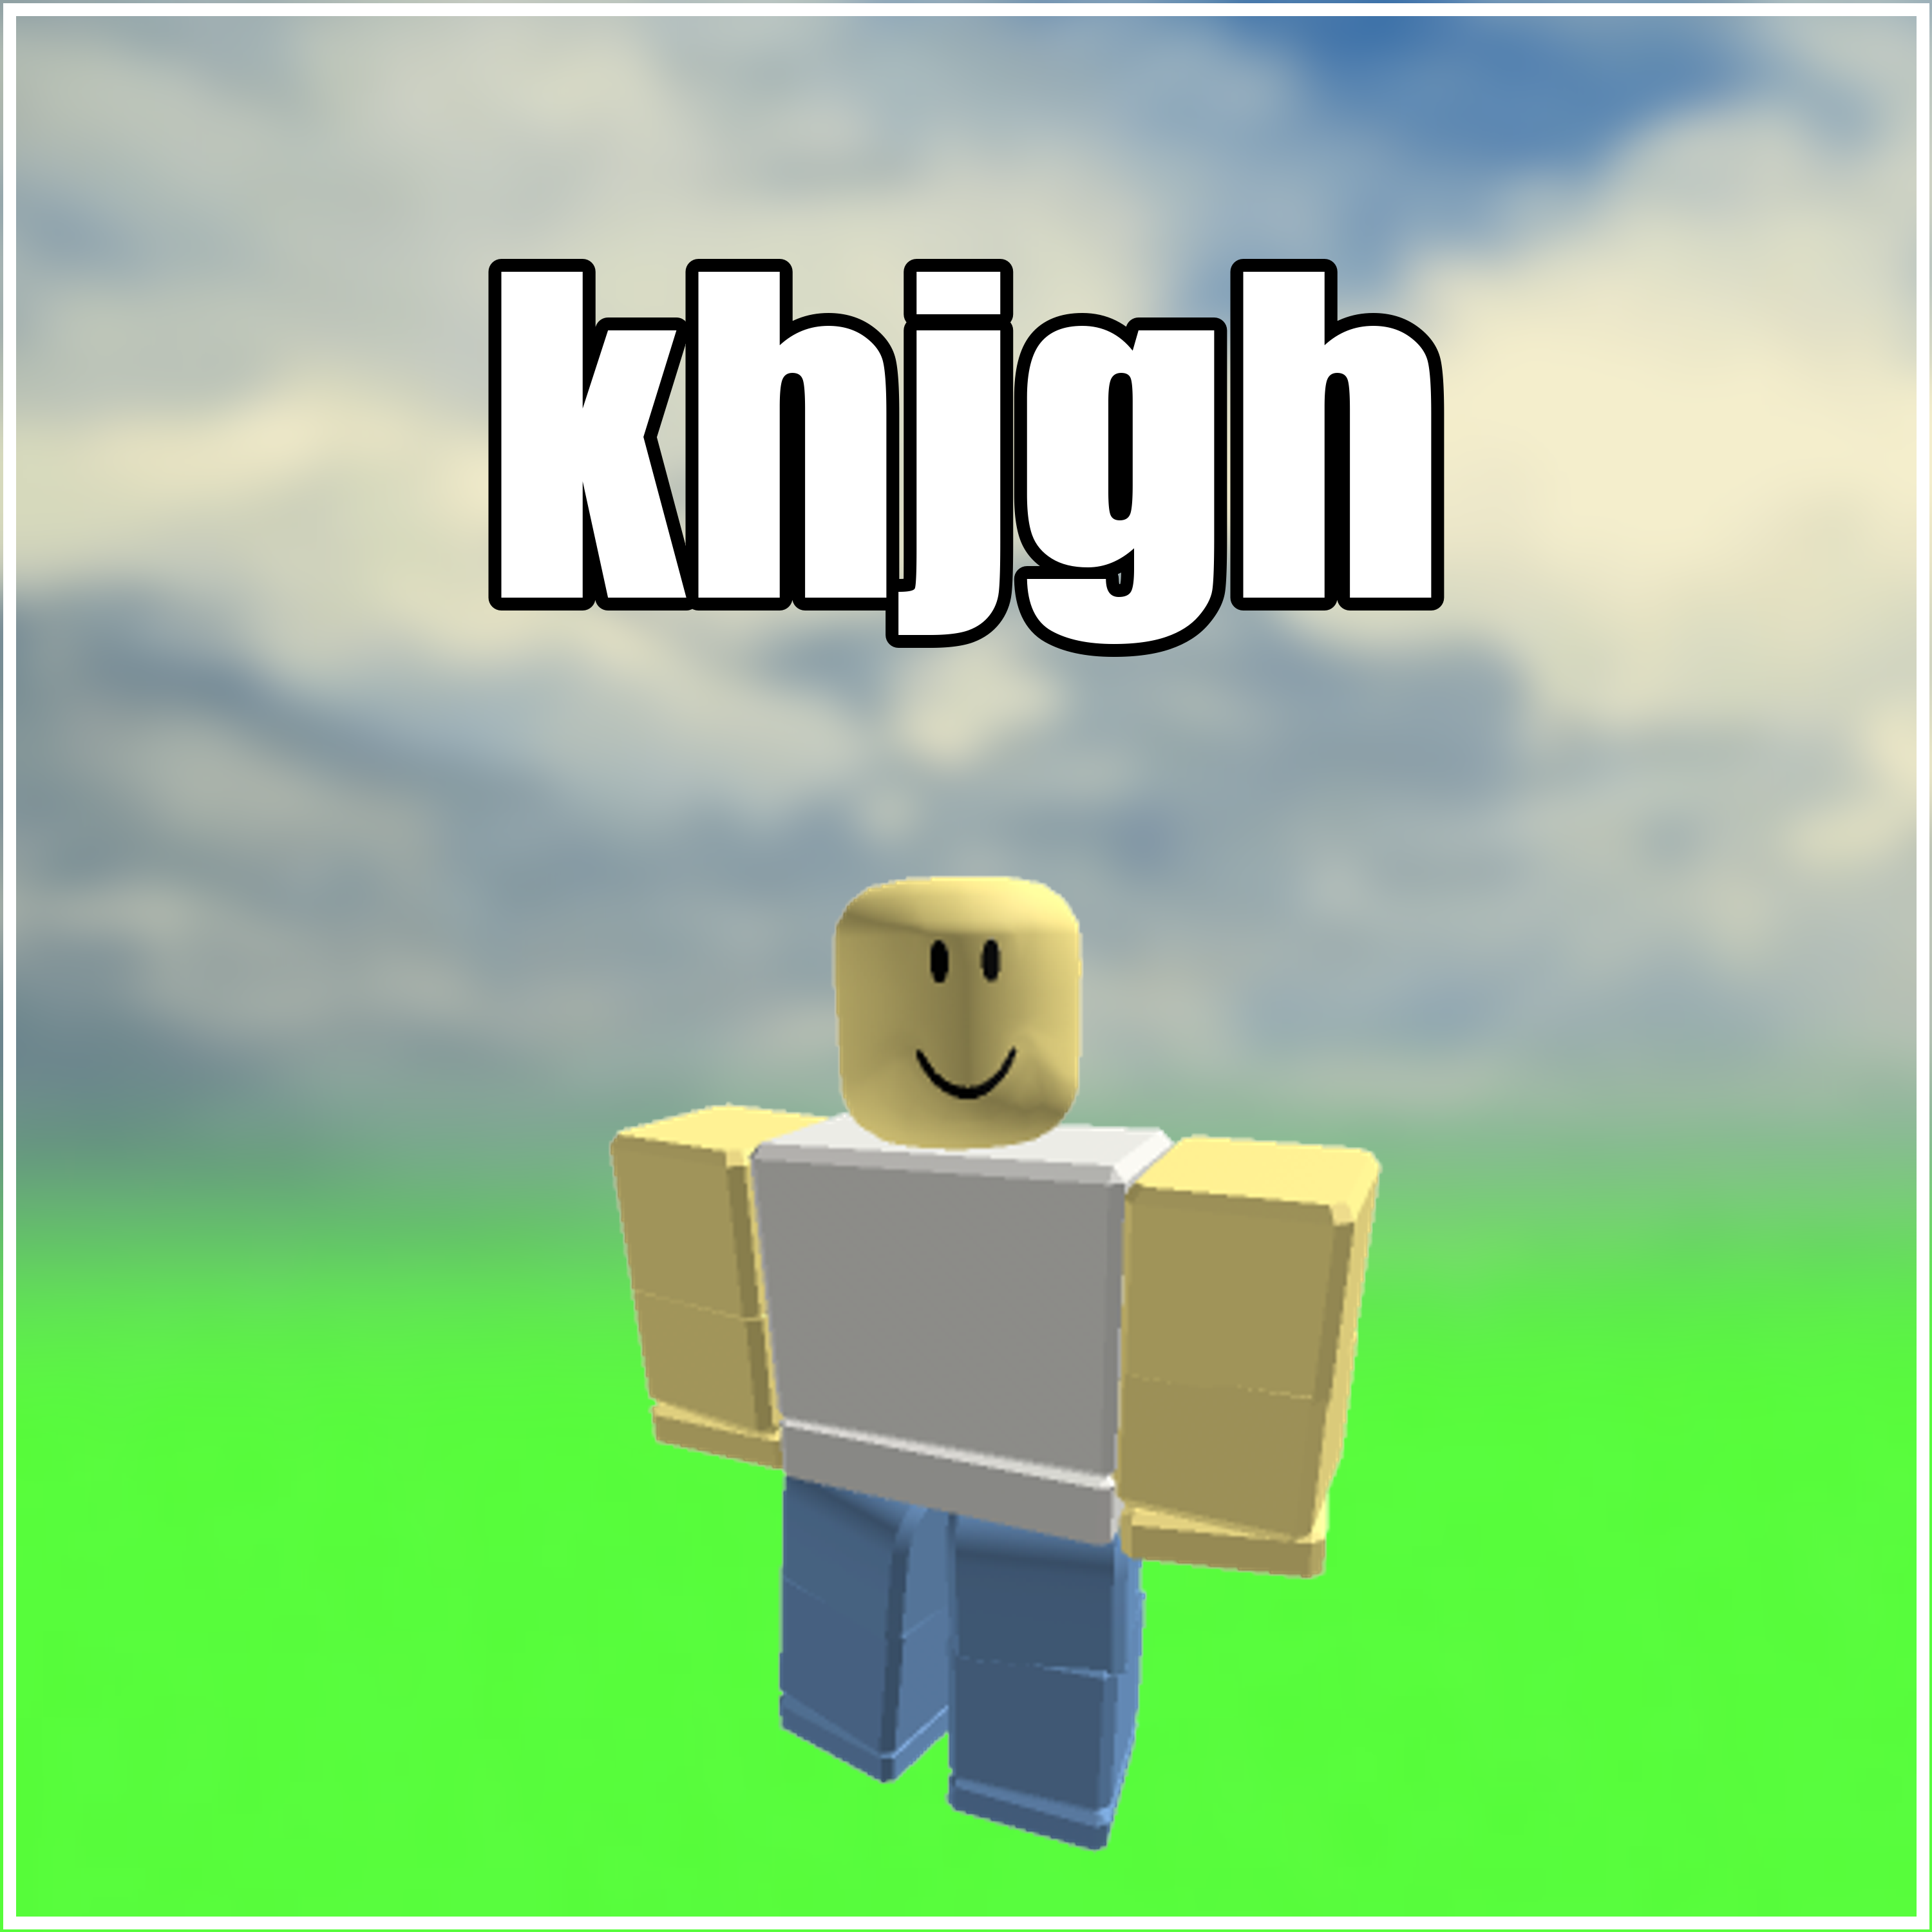 robruh RARE username "khjgh" ROBLOX account guaranteed to be unverified!